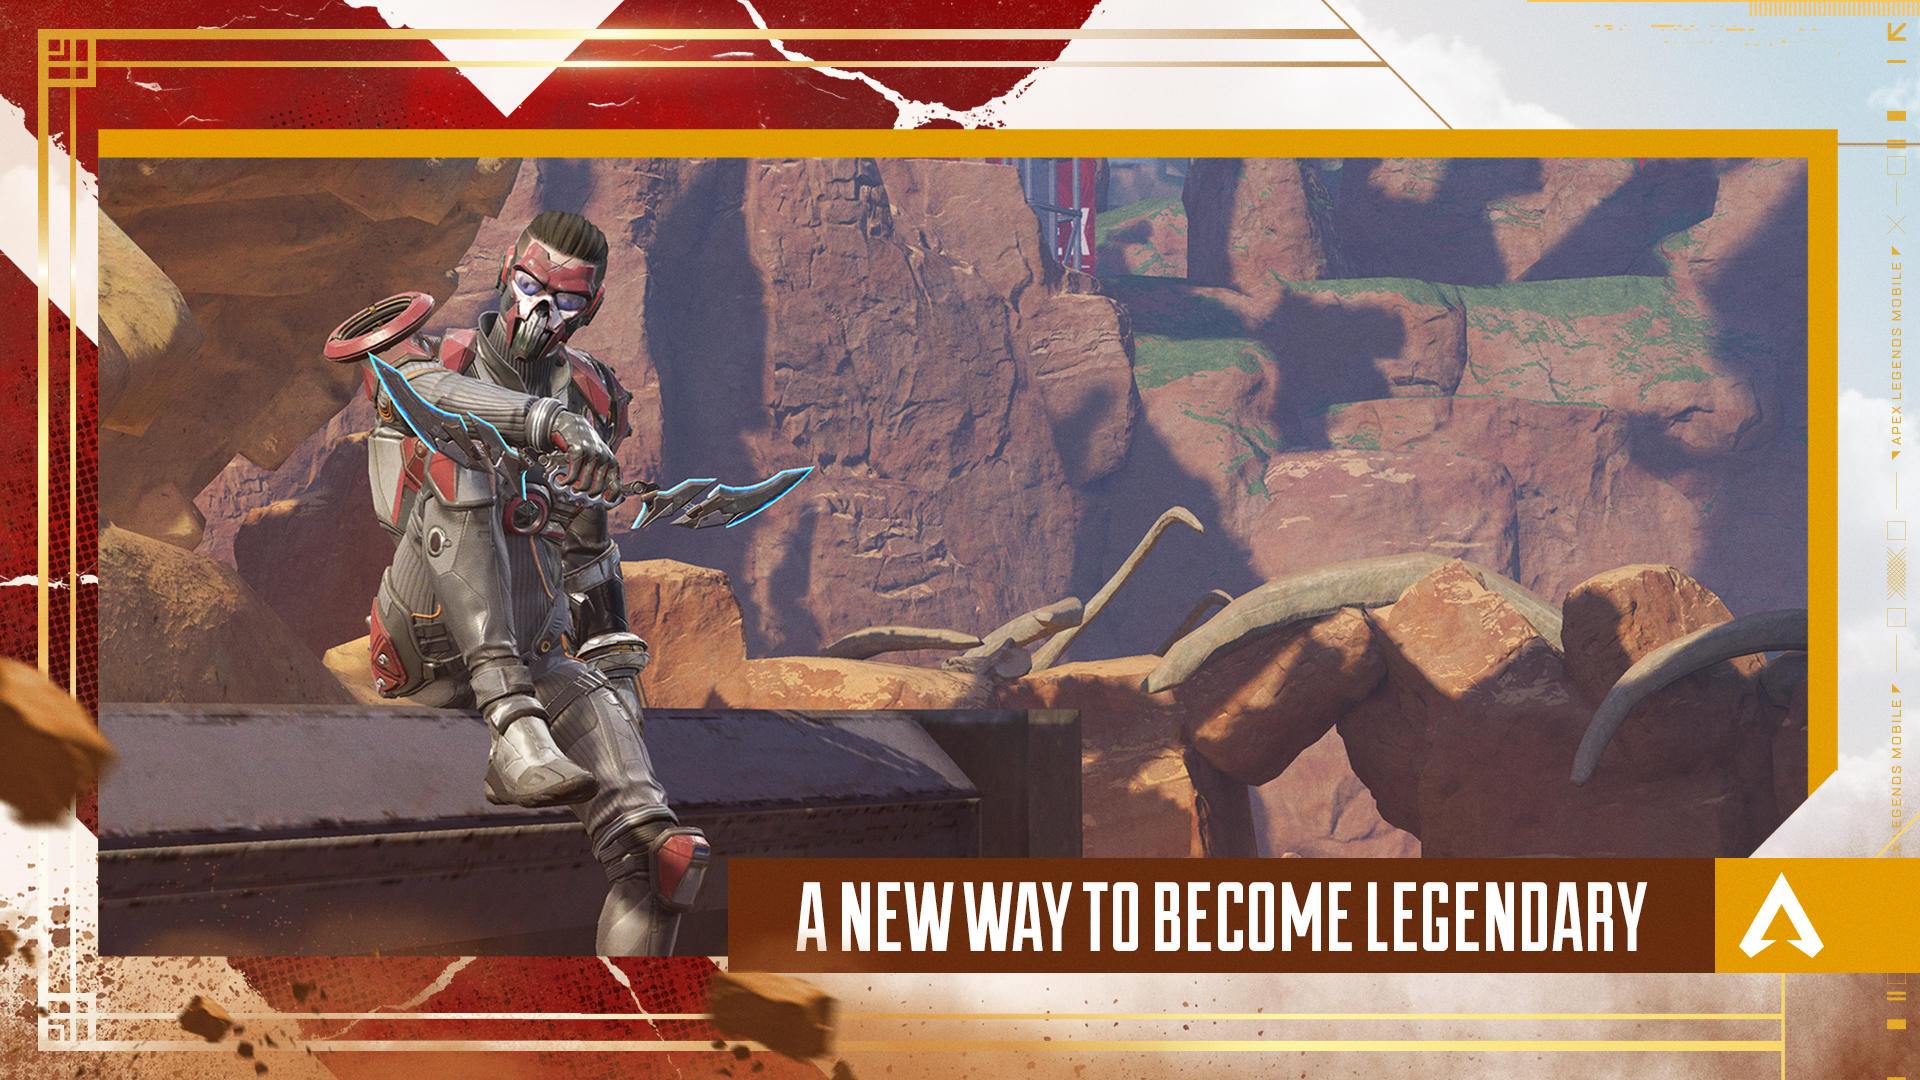 How To DOWNLOAD Apex Legends Mobile *NEW* Beta! 